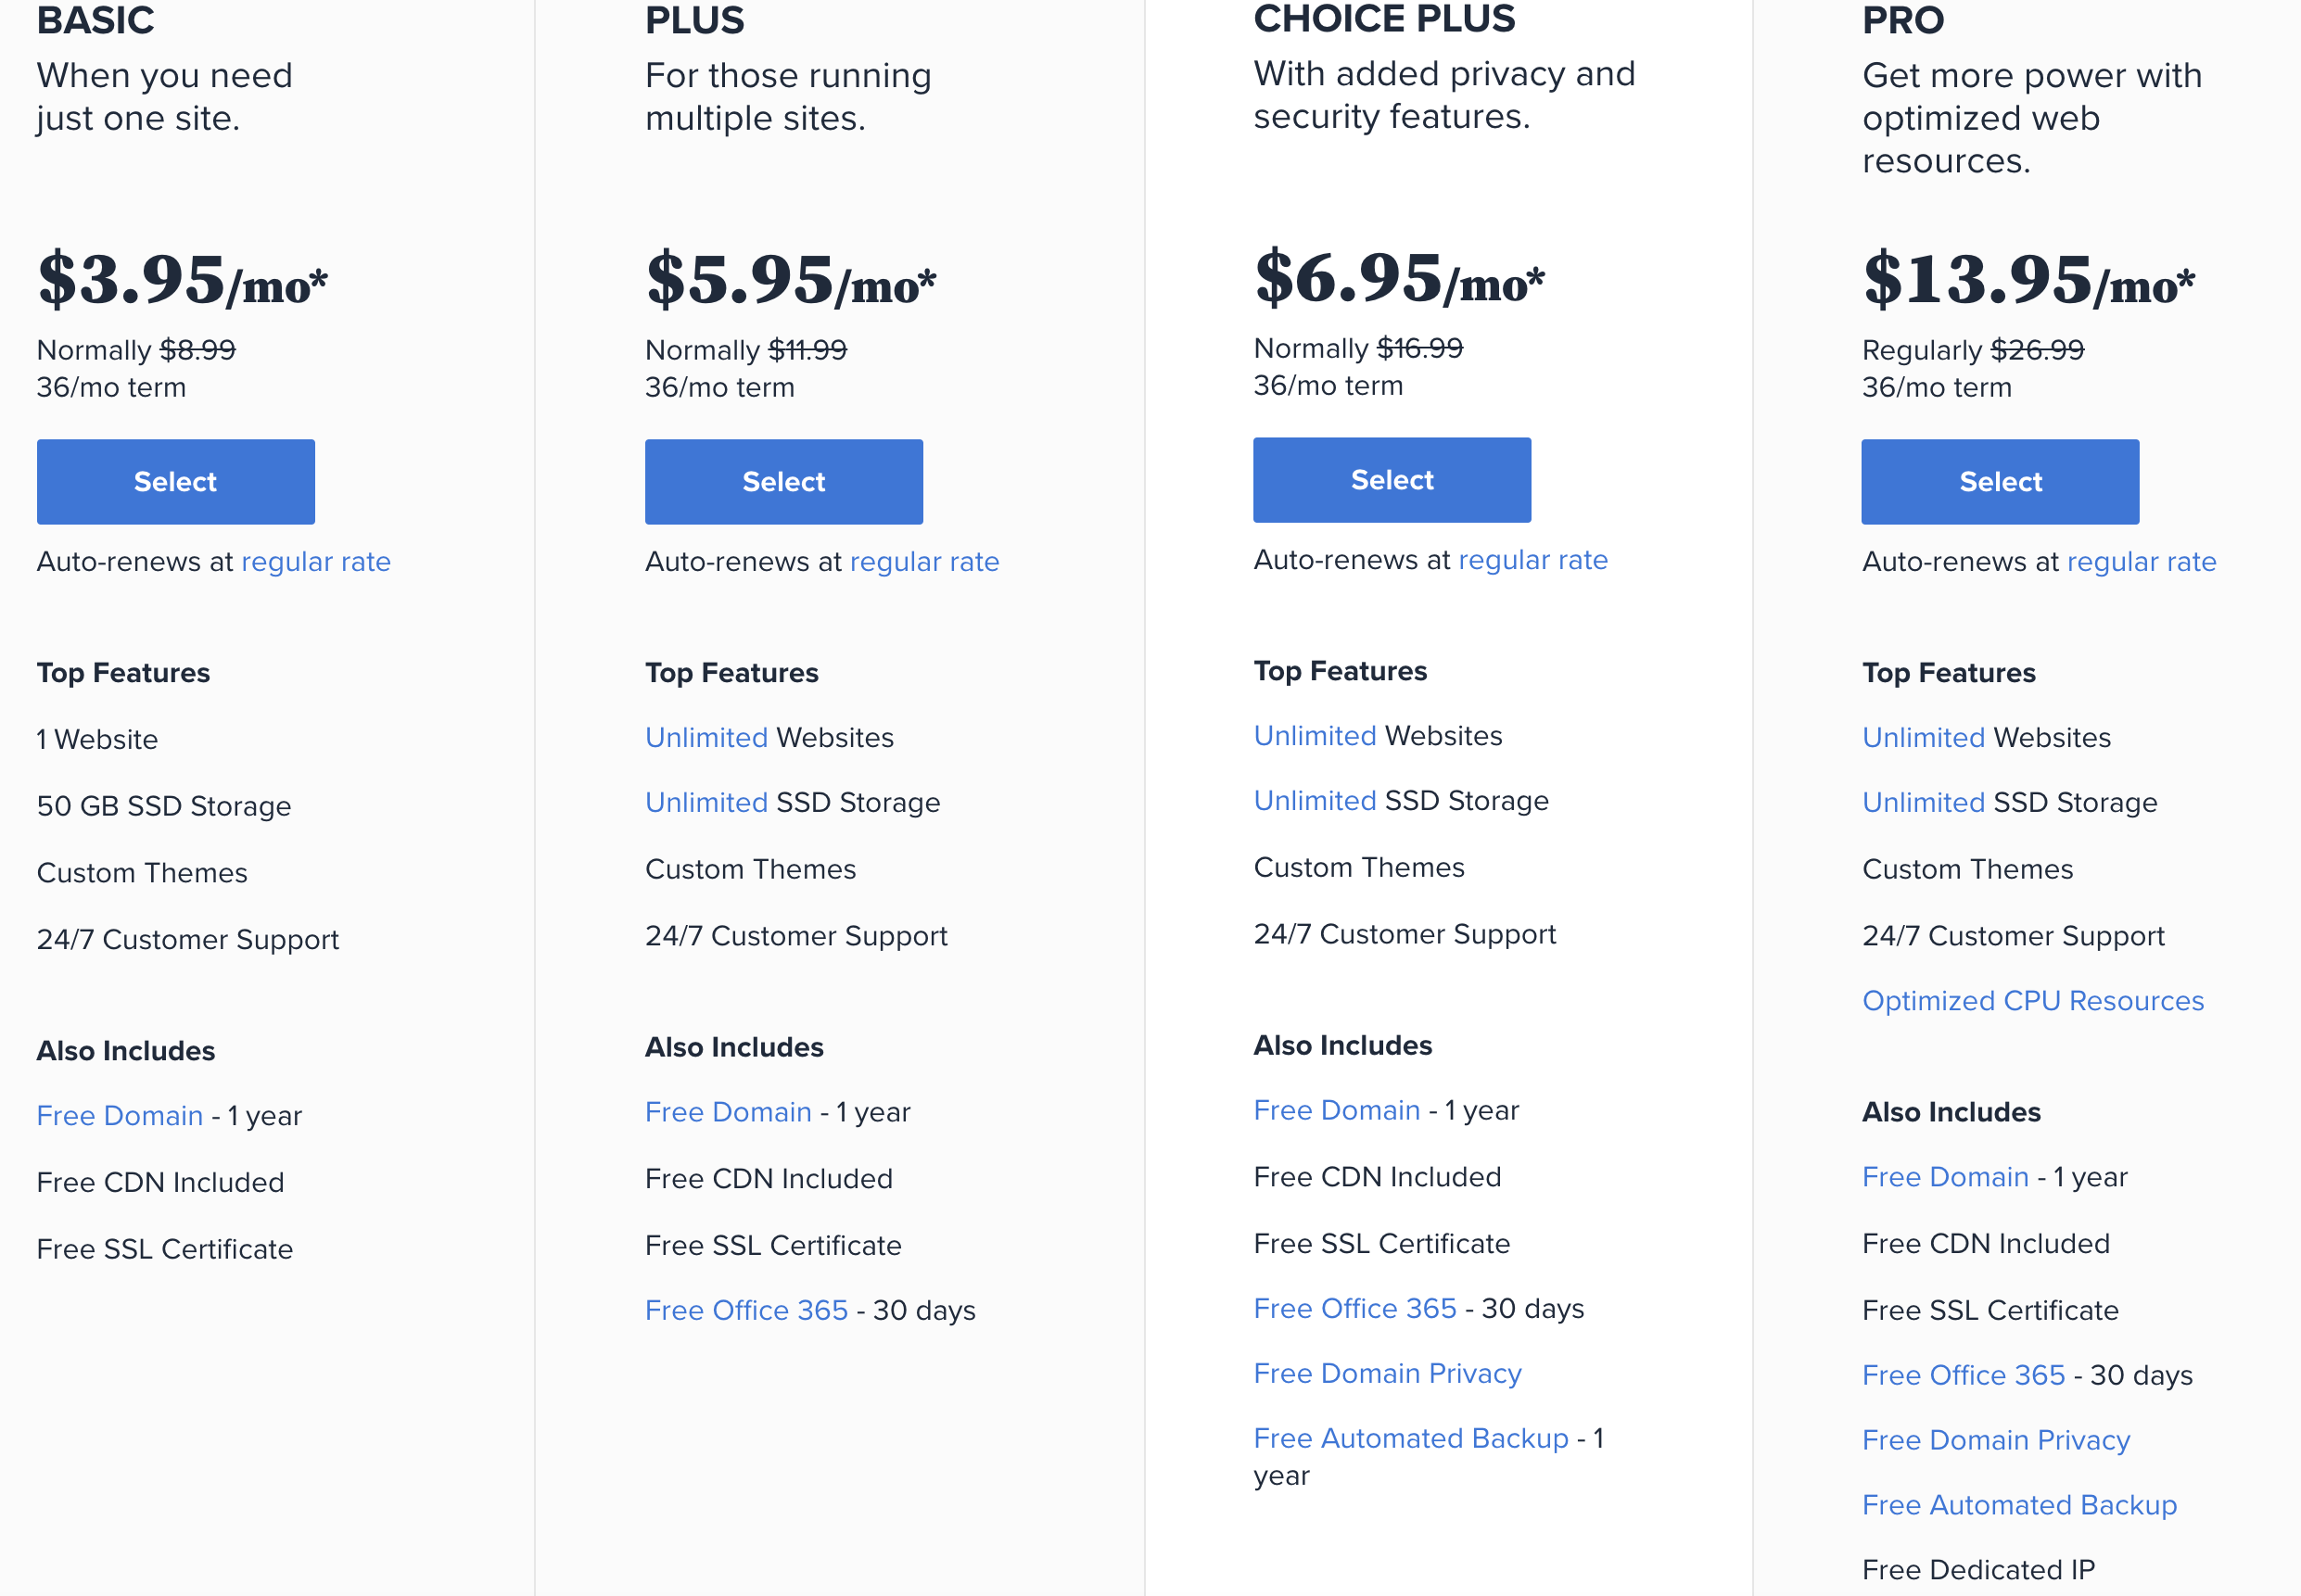 Bluehost web-hosting price chart as of Dec. 2020